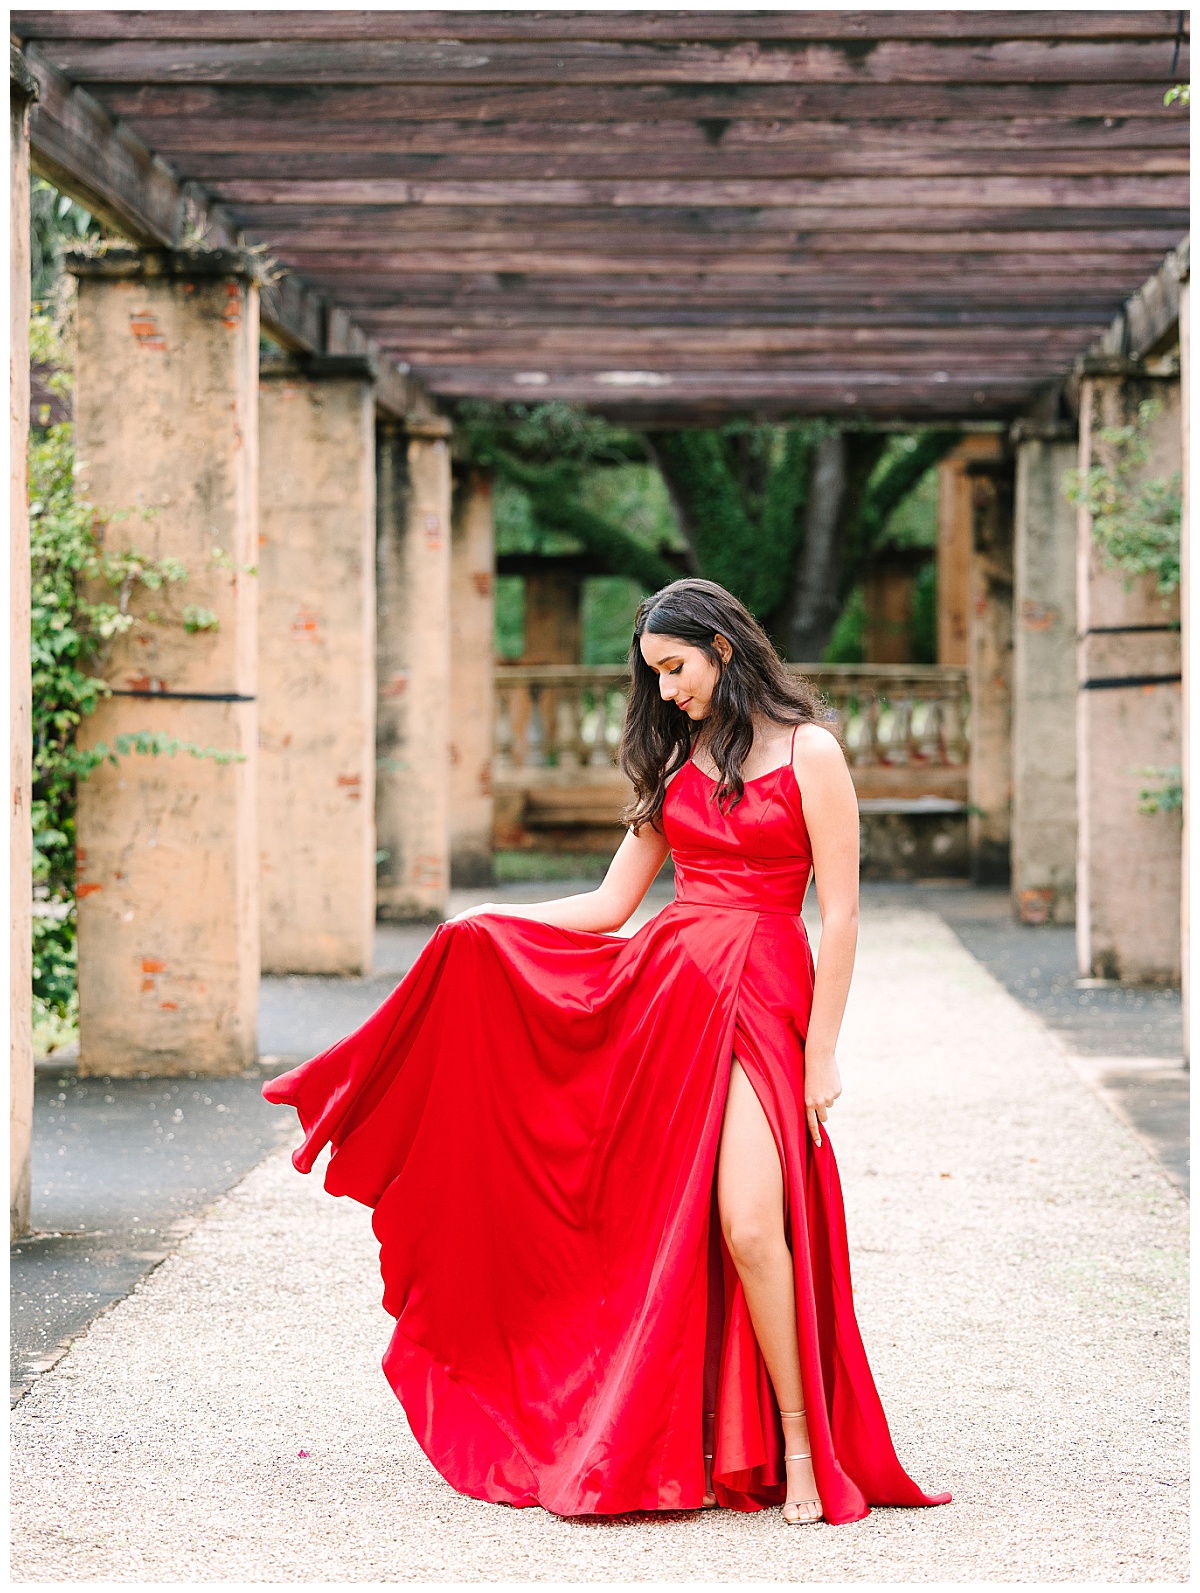 A young woman in a red gown poses in a breezeway similar to Vizcaya Museum in Florida.